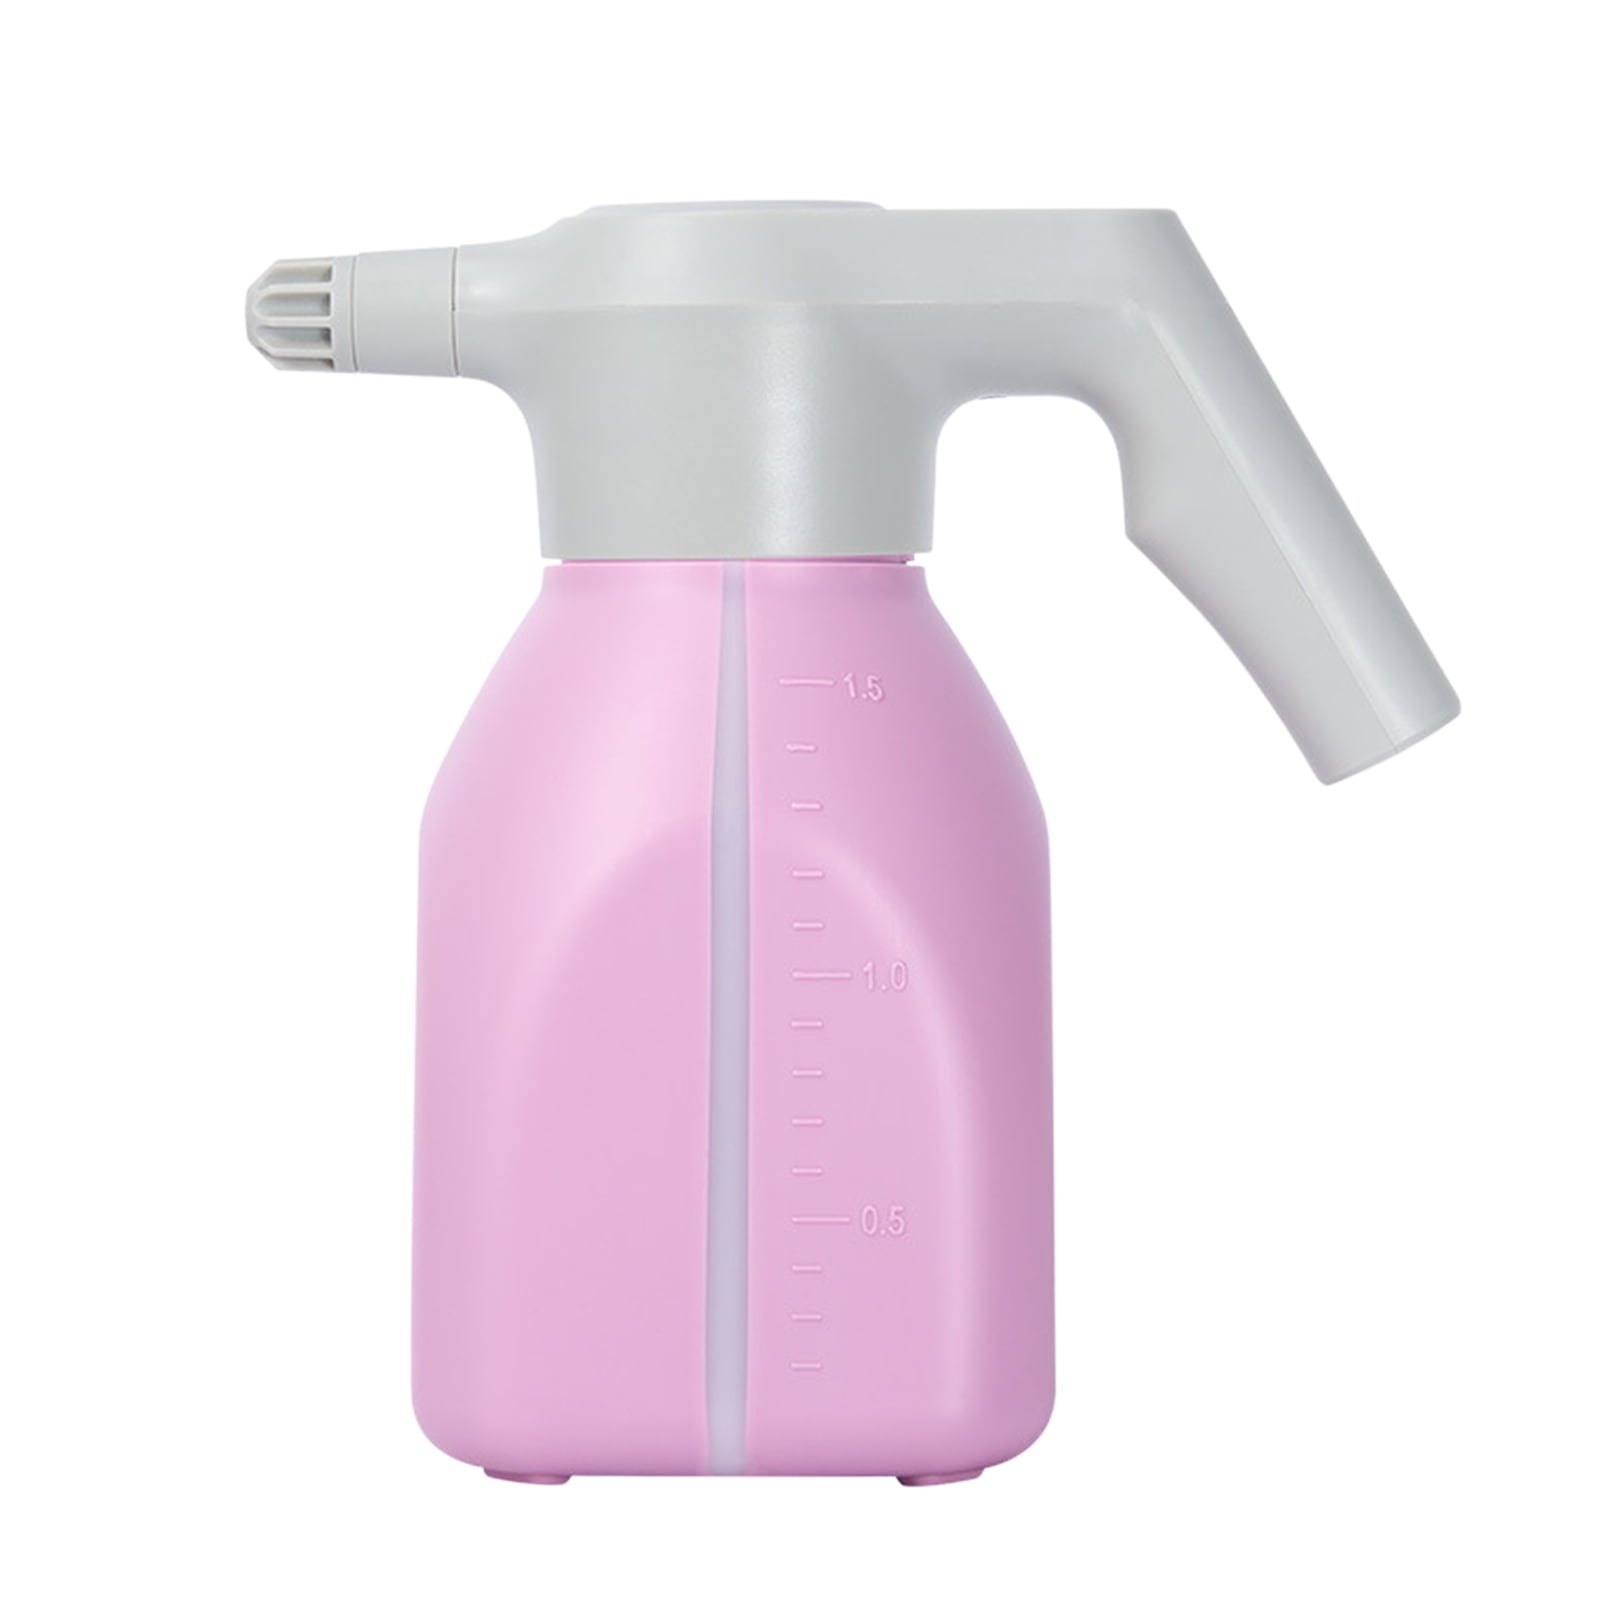 Details about   Household Electric Plant Spray Bottle Automatic Watering USB Rechargeable Tool 